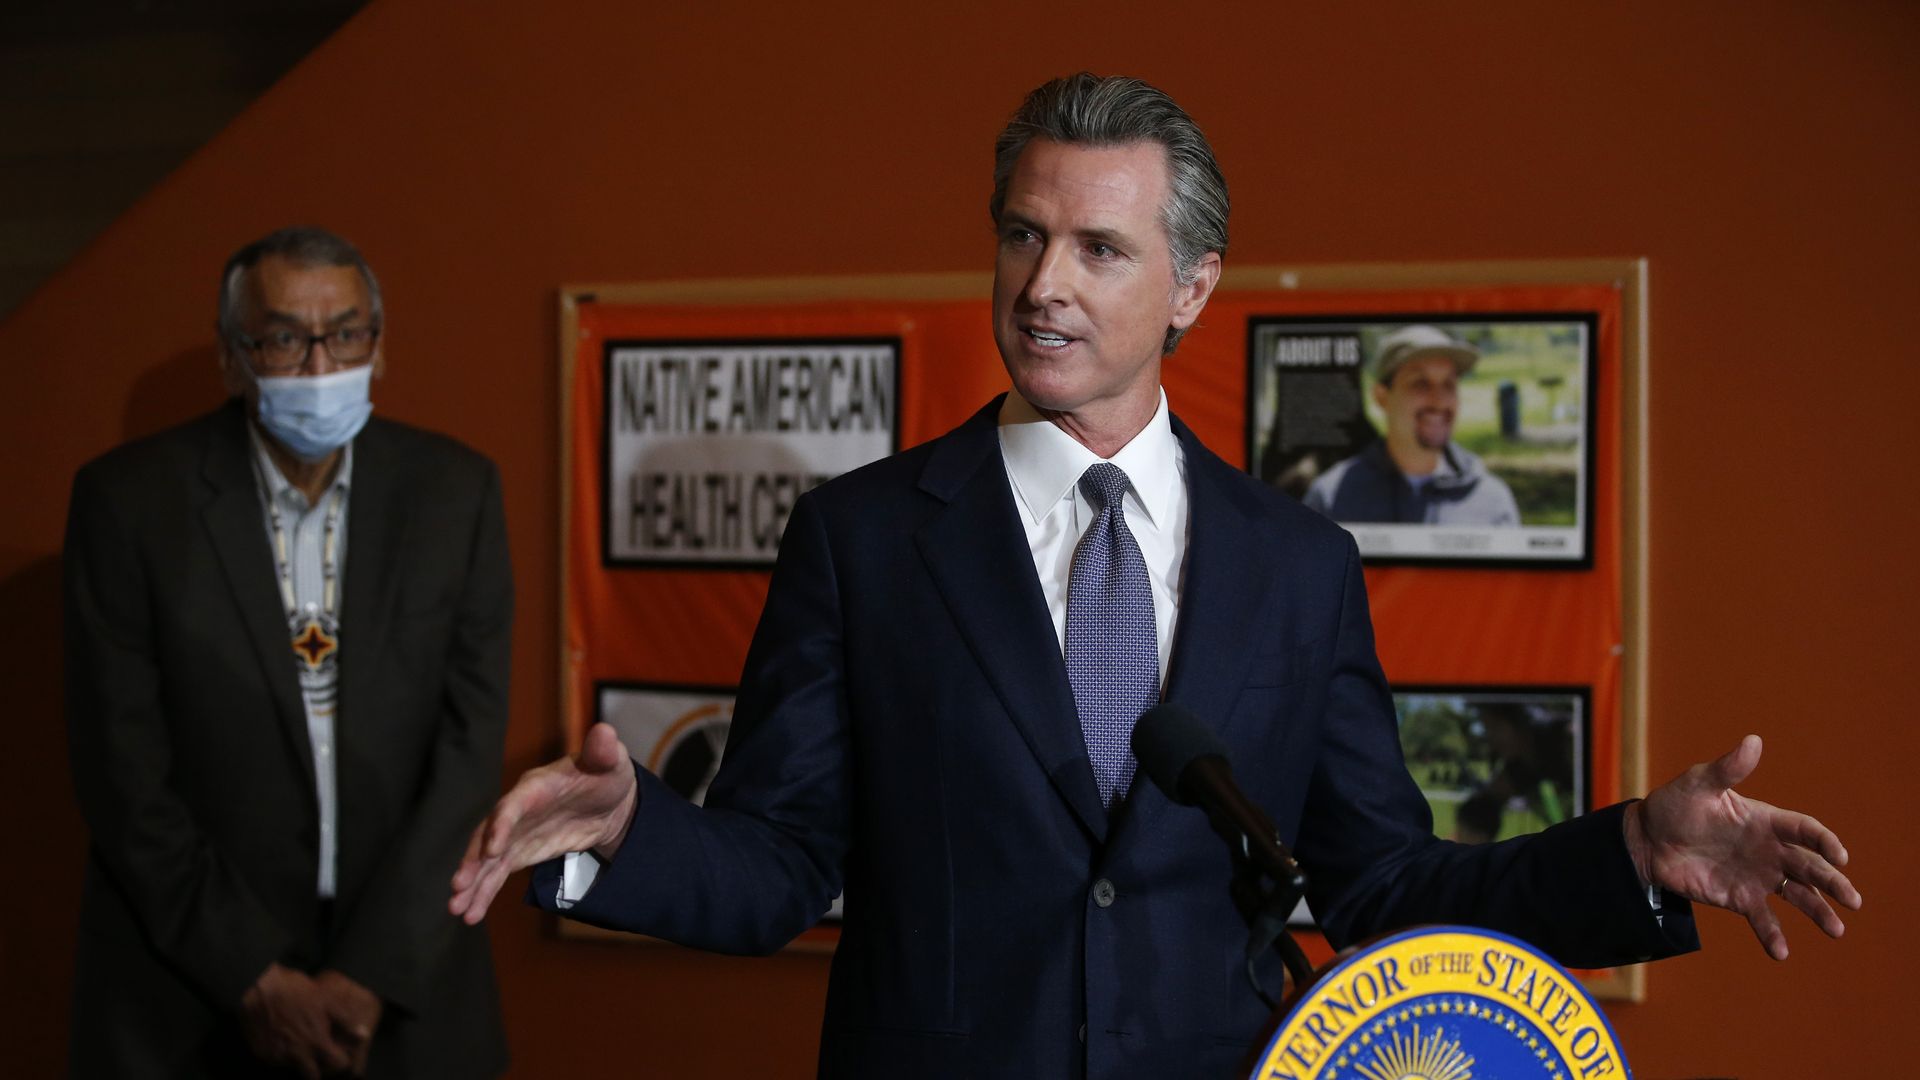 Photo of Gavin Newsom speaking from a podium while gesturing with his hands raised